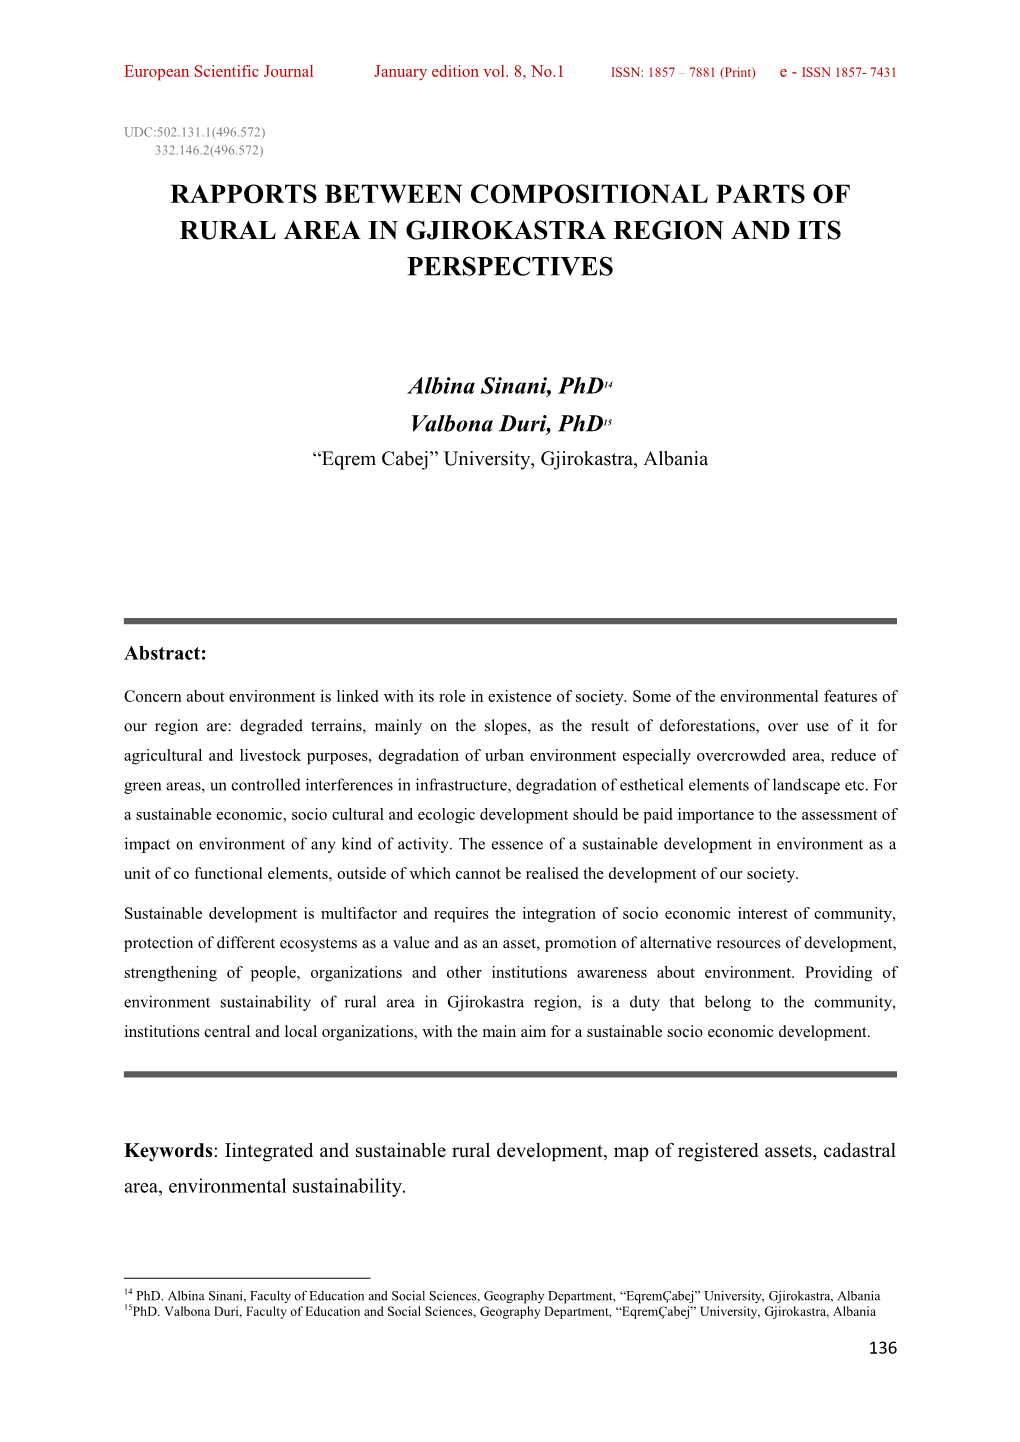 Rapports Between Compositional Parts of Rural Area in Gjirokastra Region and Its Perspectives